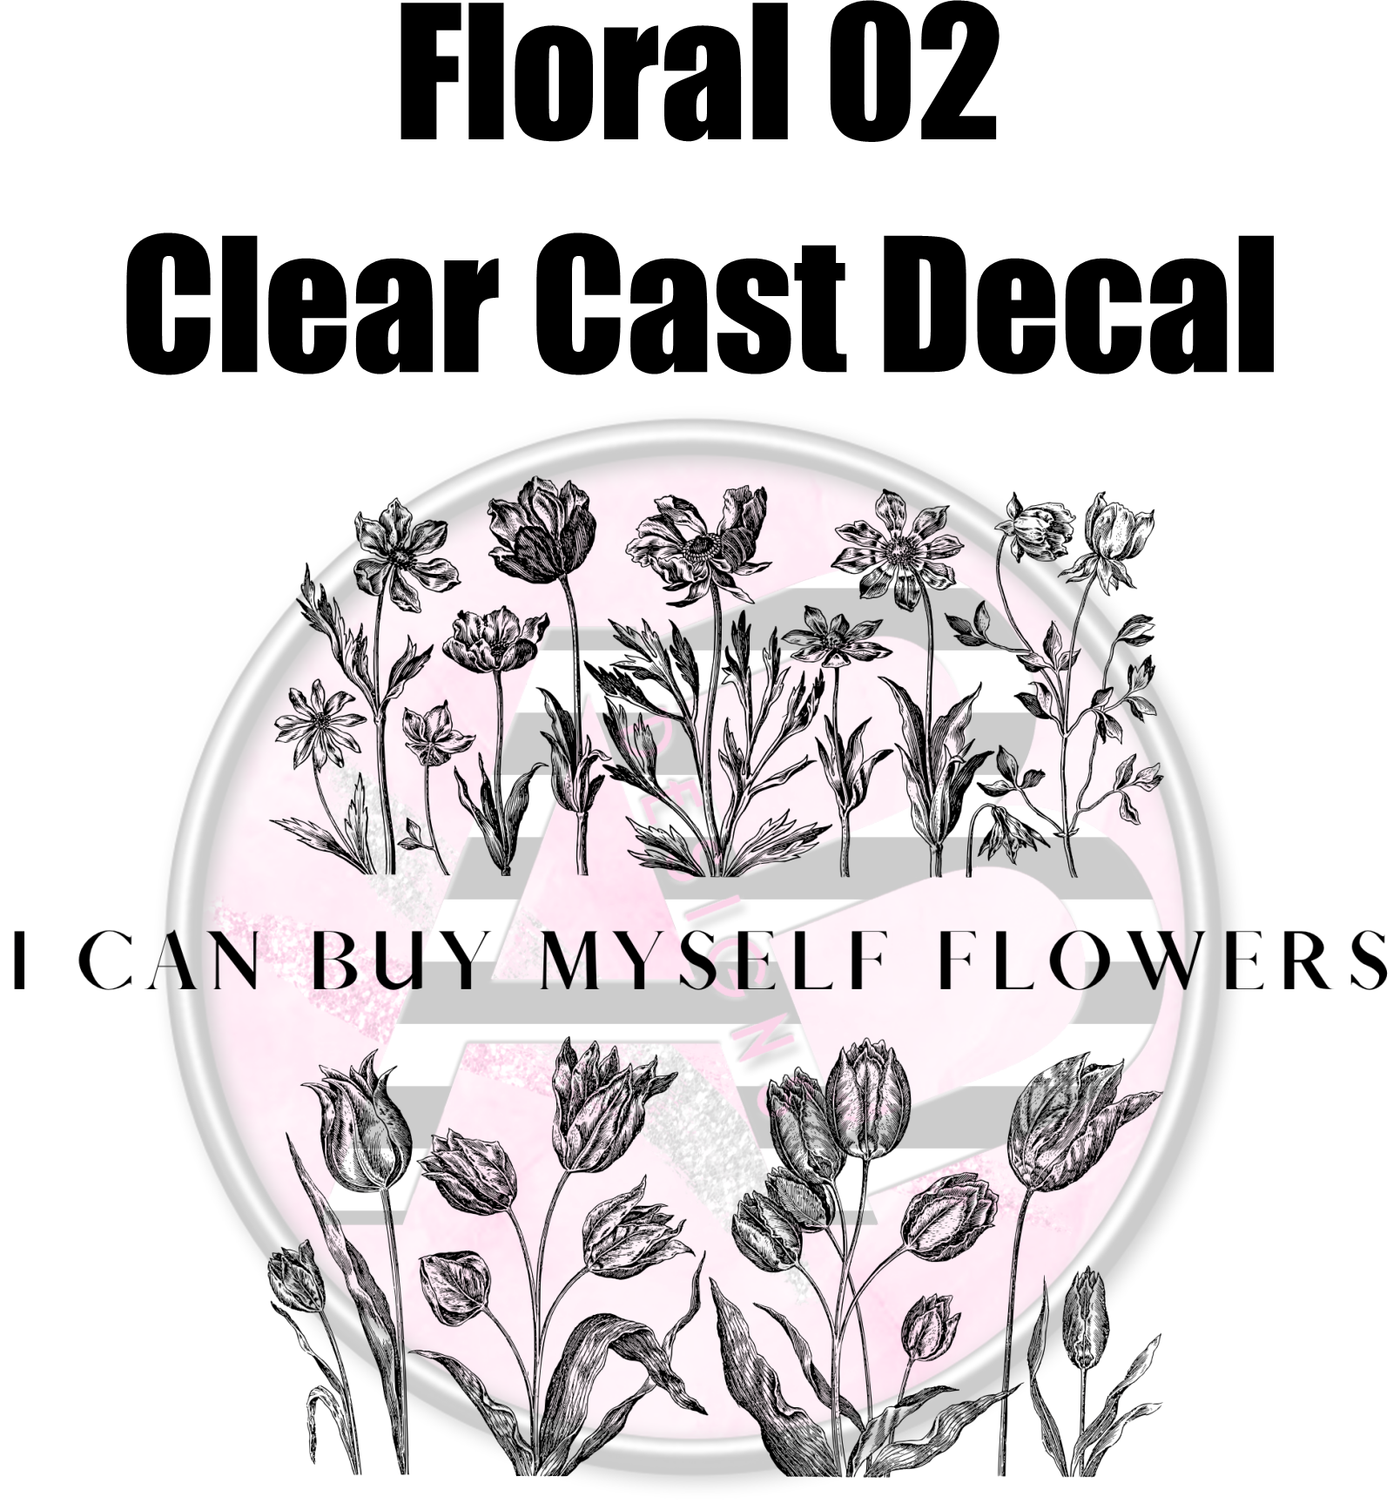 Floral 02 - Clear Cast Decal